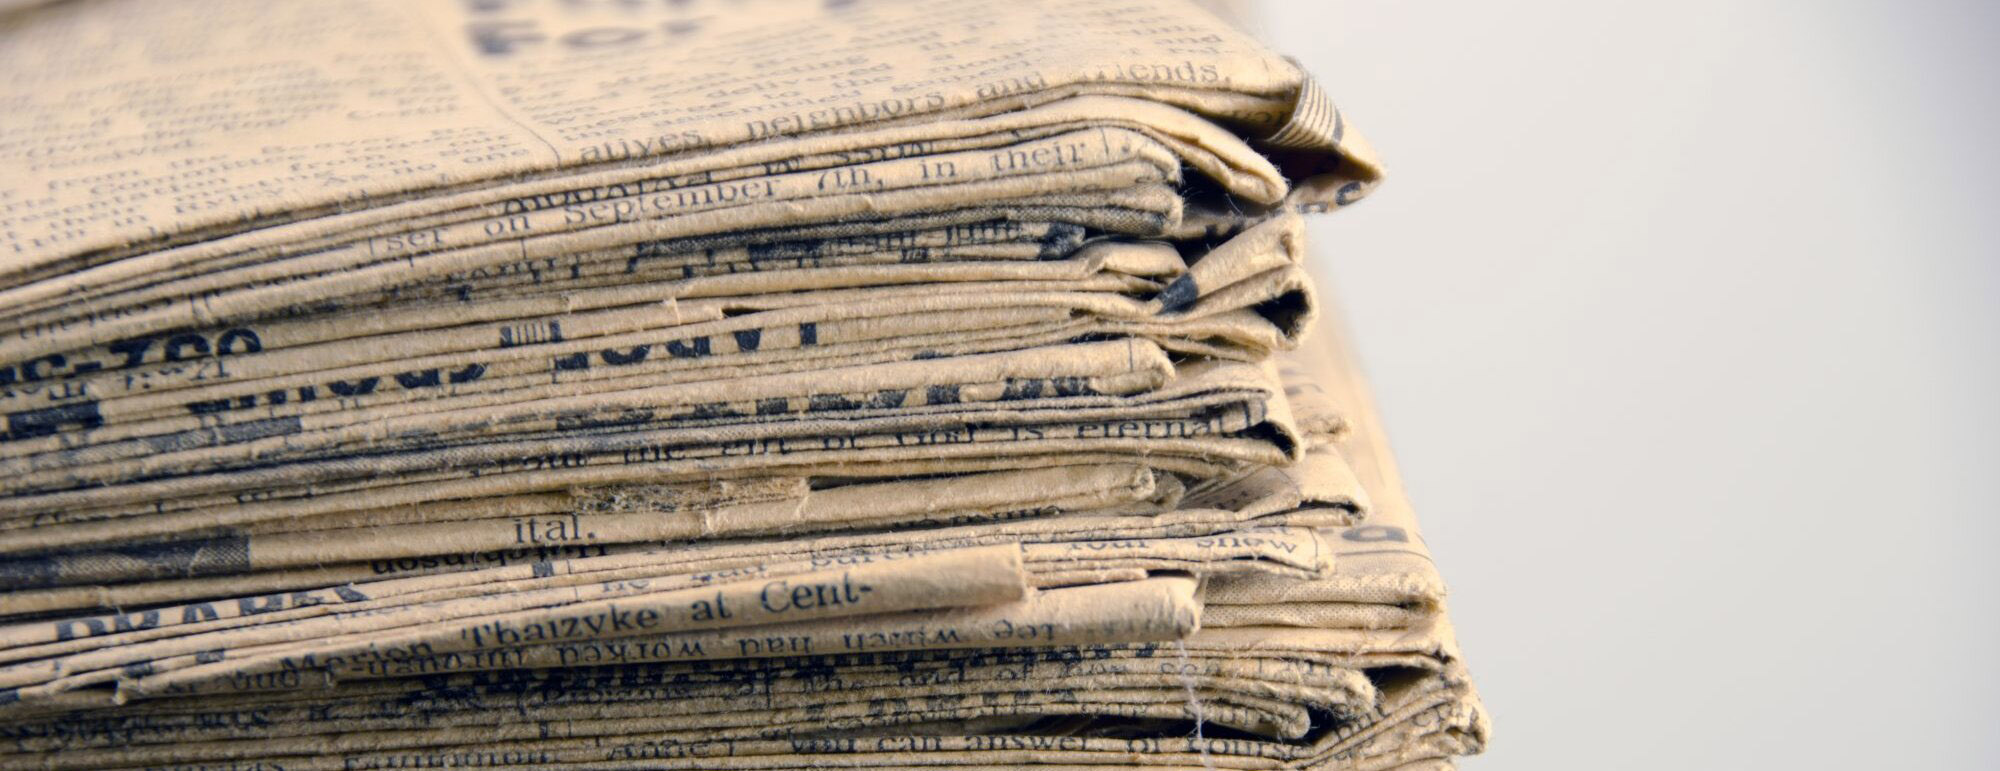 Tracing Your Roots in Eighteenth Century Newspapers